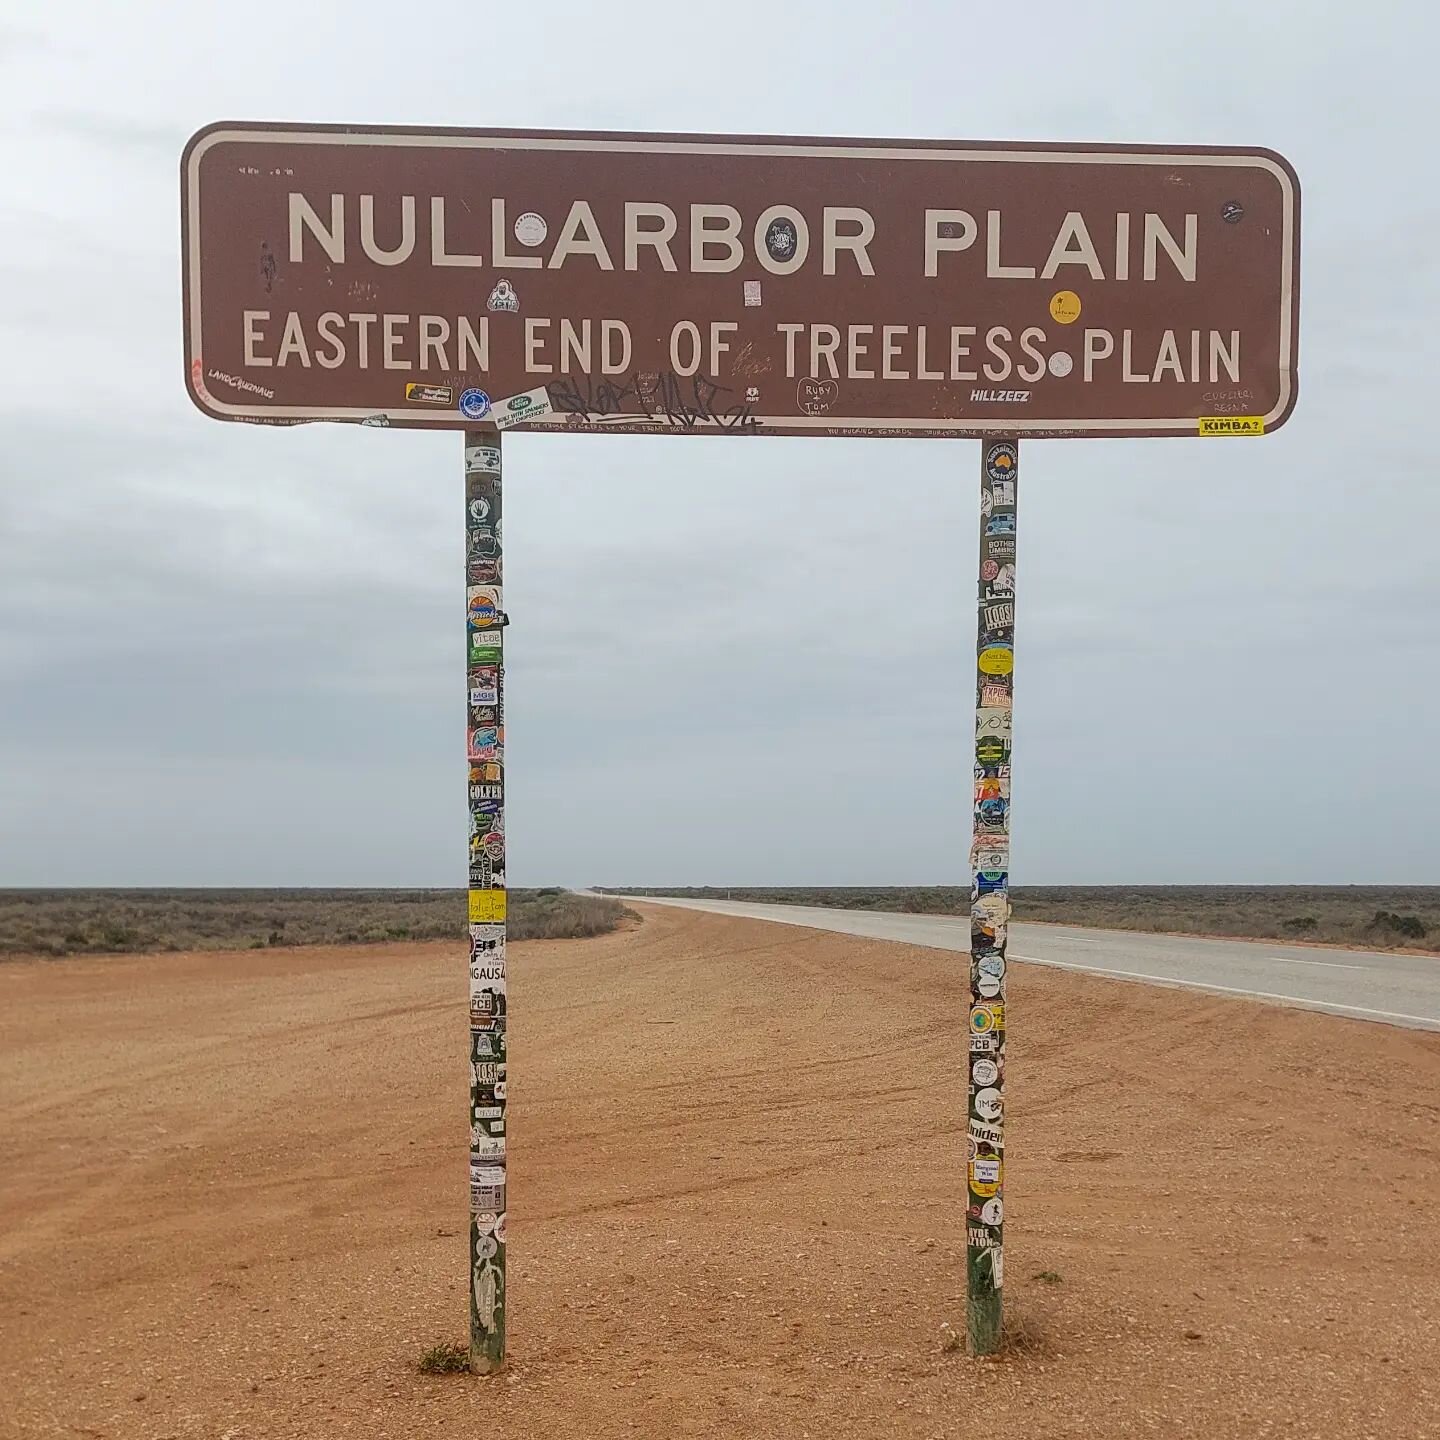 Australia &ndash; UPDATE

DUTCH BELOW

Today we have been on the road for 3 years, 6 months and 3 days, wuttt??? And this week we are literally and figuratively on the Road. To nowhere&hellip;?

We drive the &quot;Nullarbor&quot;, where you cross the